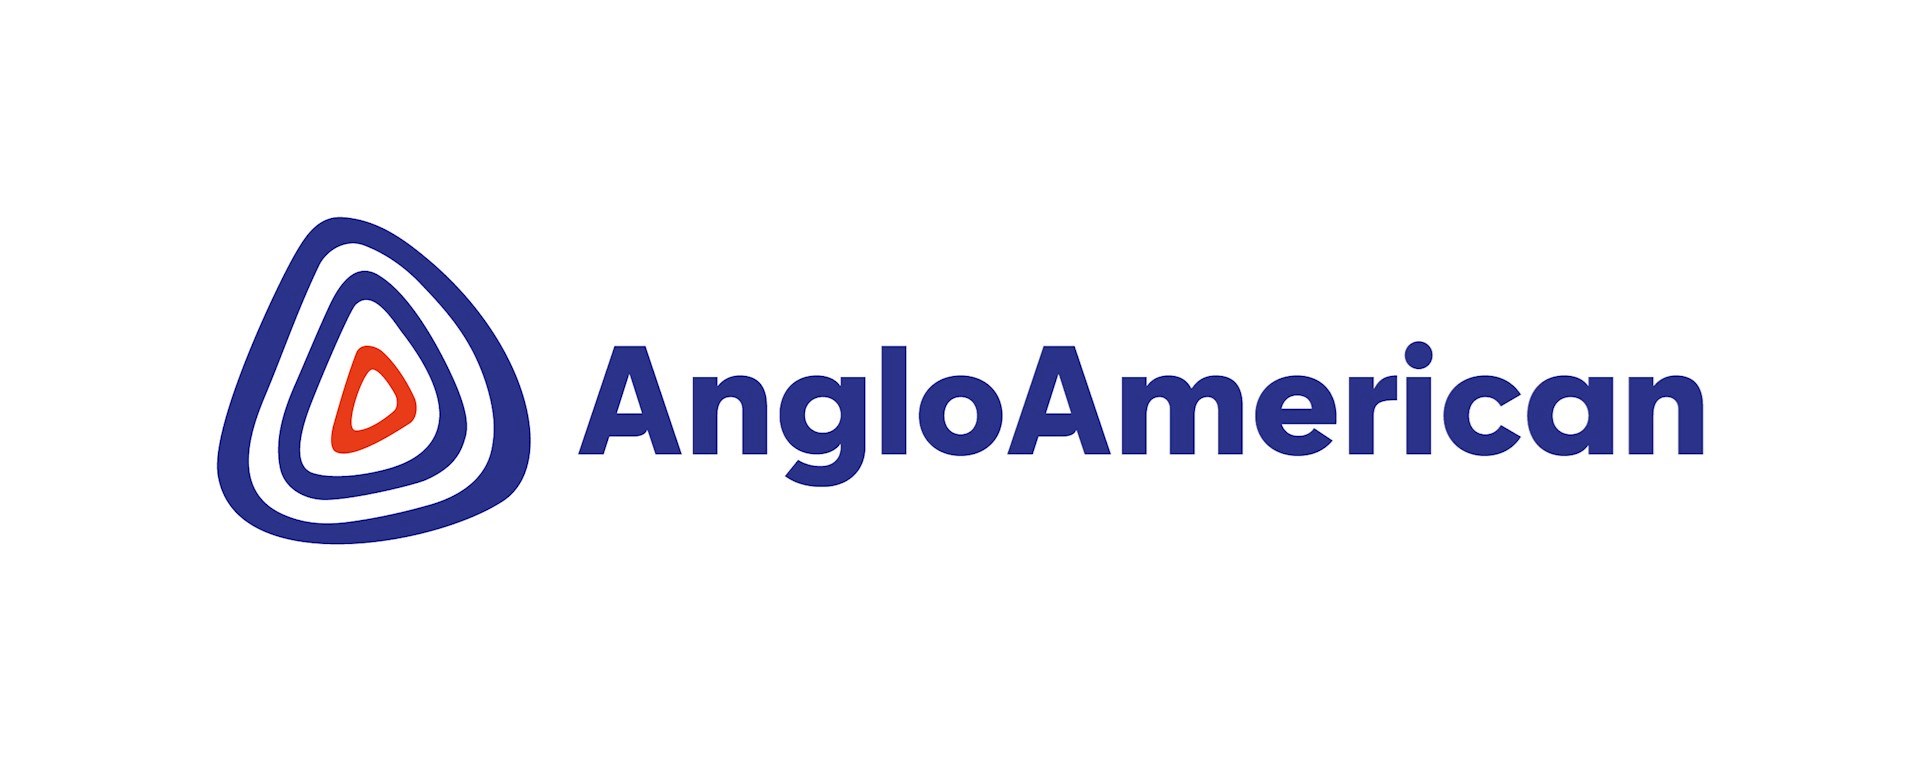 AngloAmerican Marketing Limited